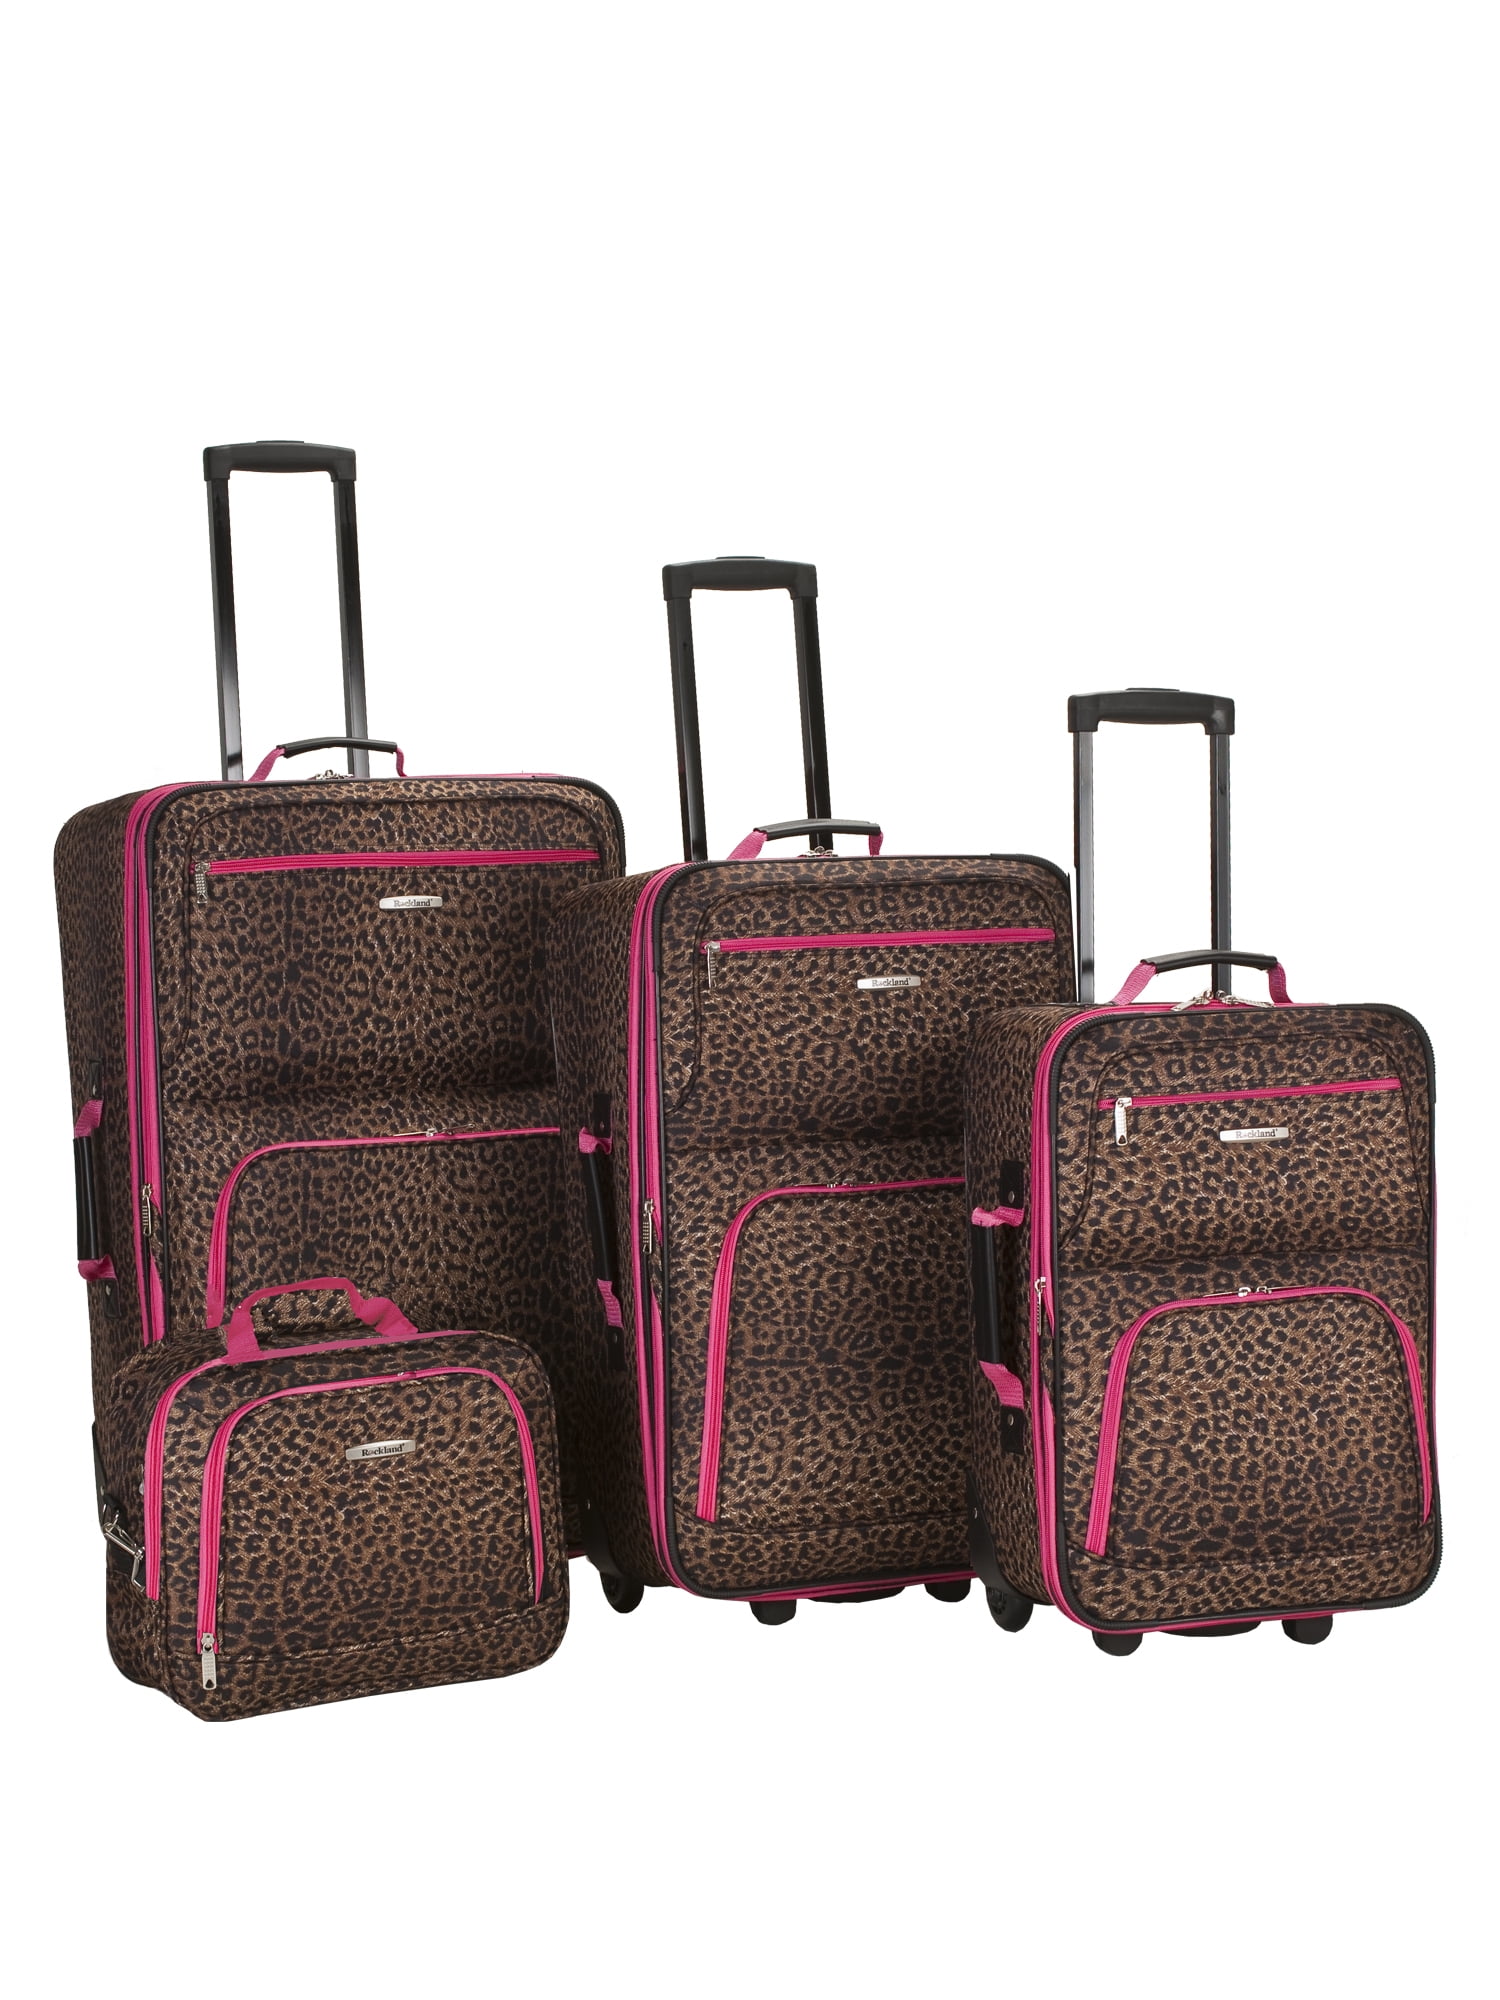 Rockland Safari 4pc Rolling Softside Checked Luggage Set - Pink Leopard